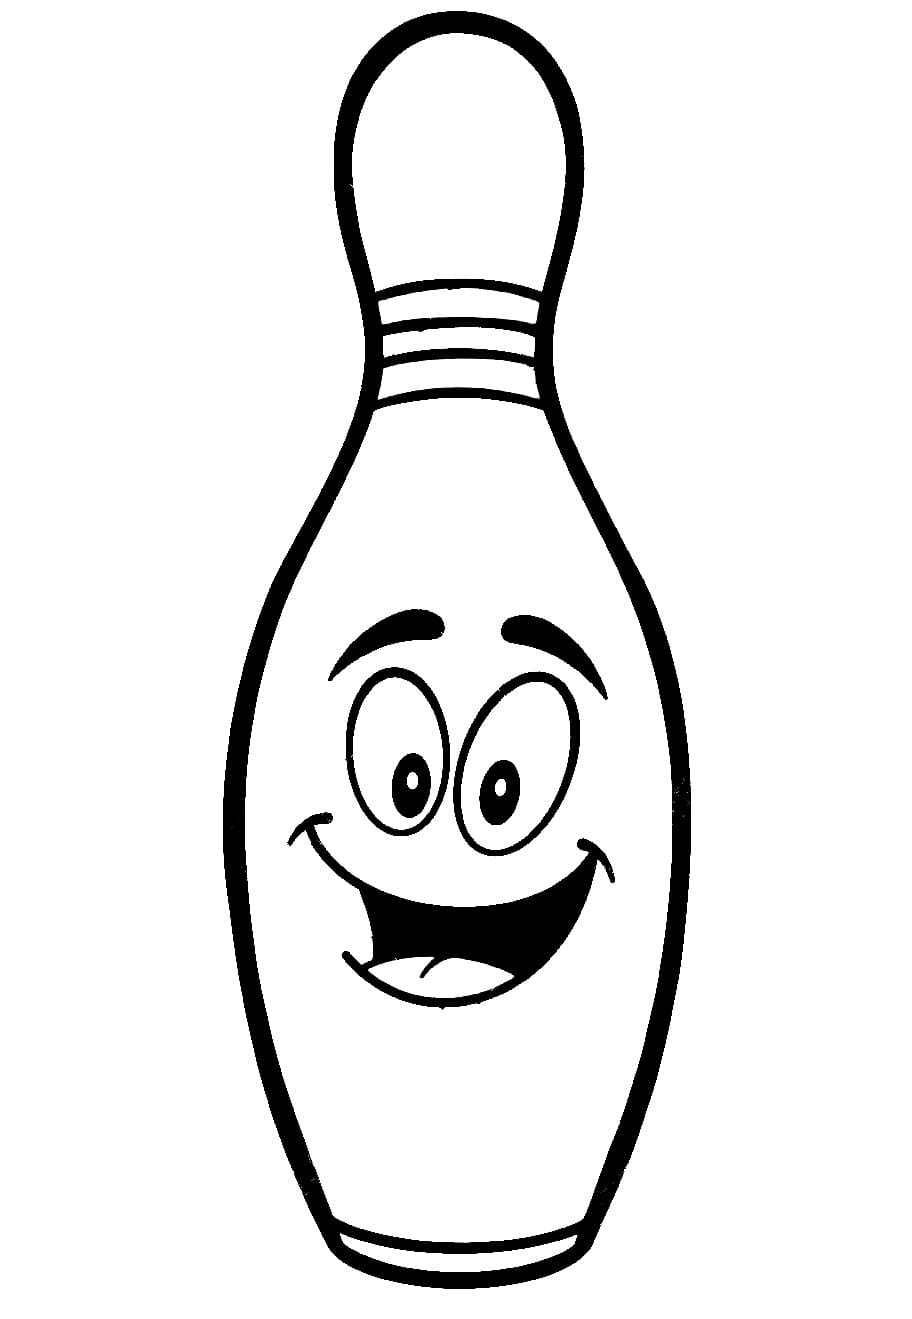 Cartoon Bowling Pin coloring page - Download, Print or Color Online for ...